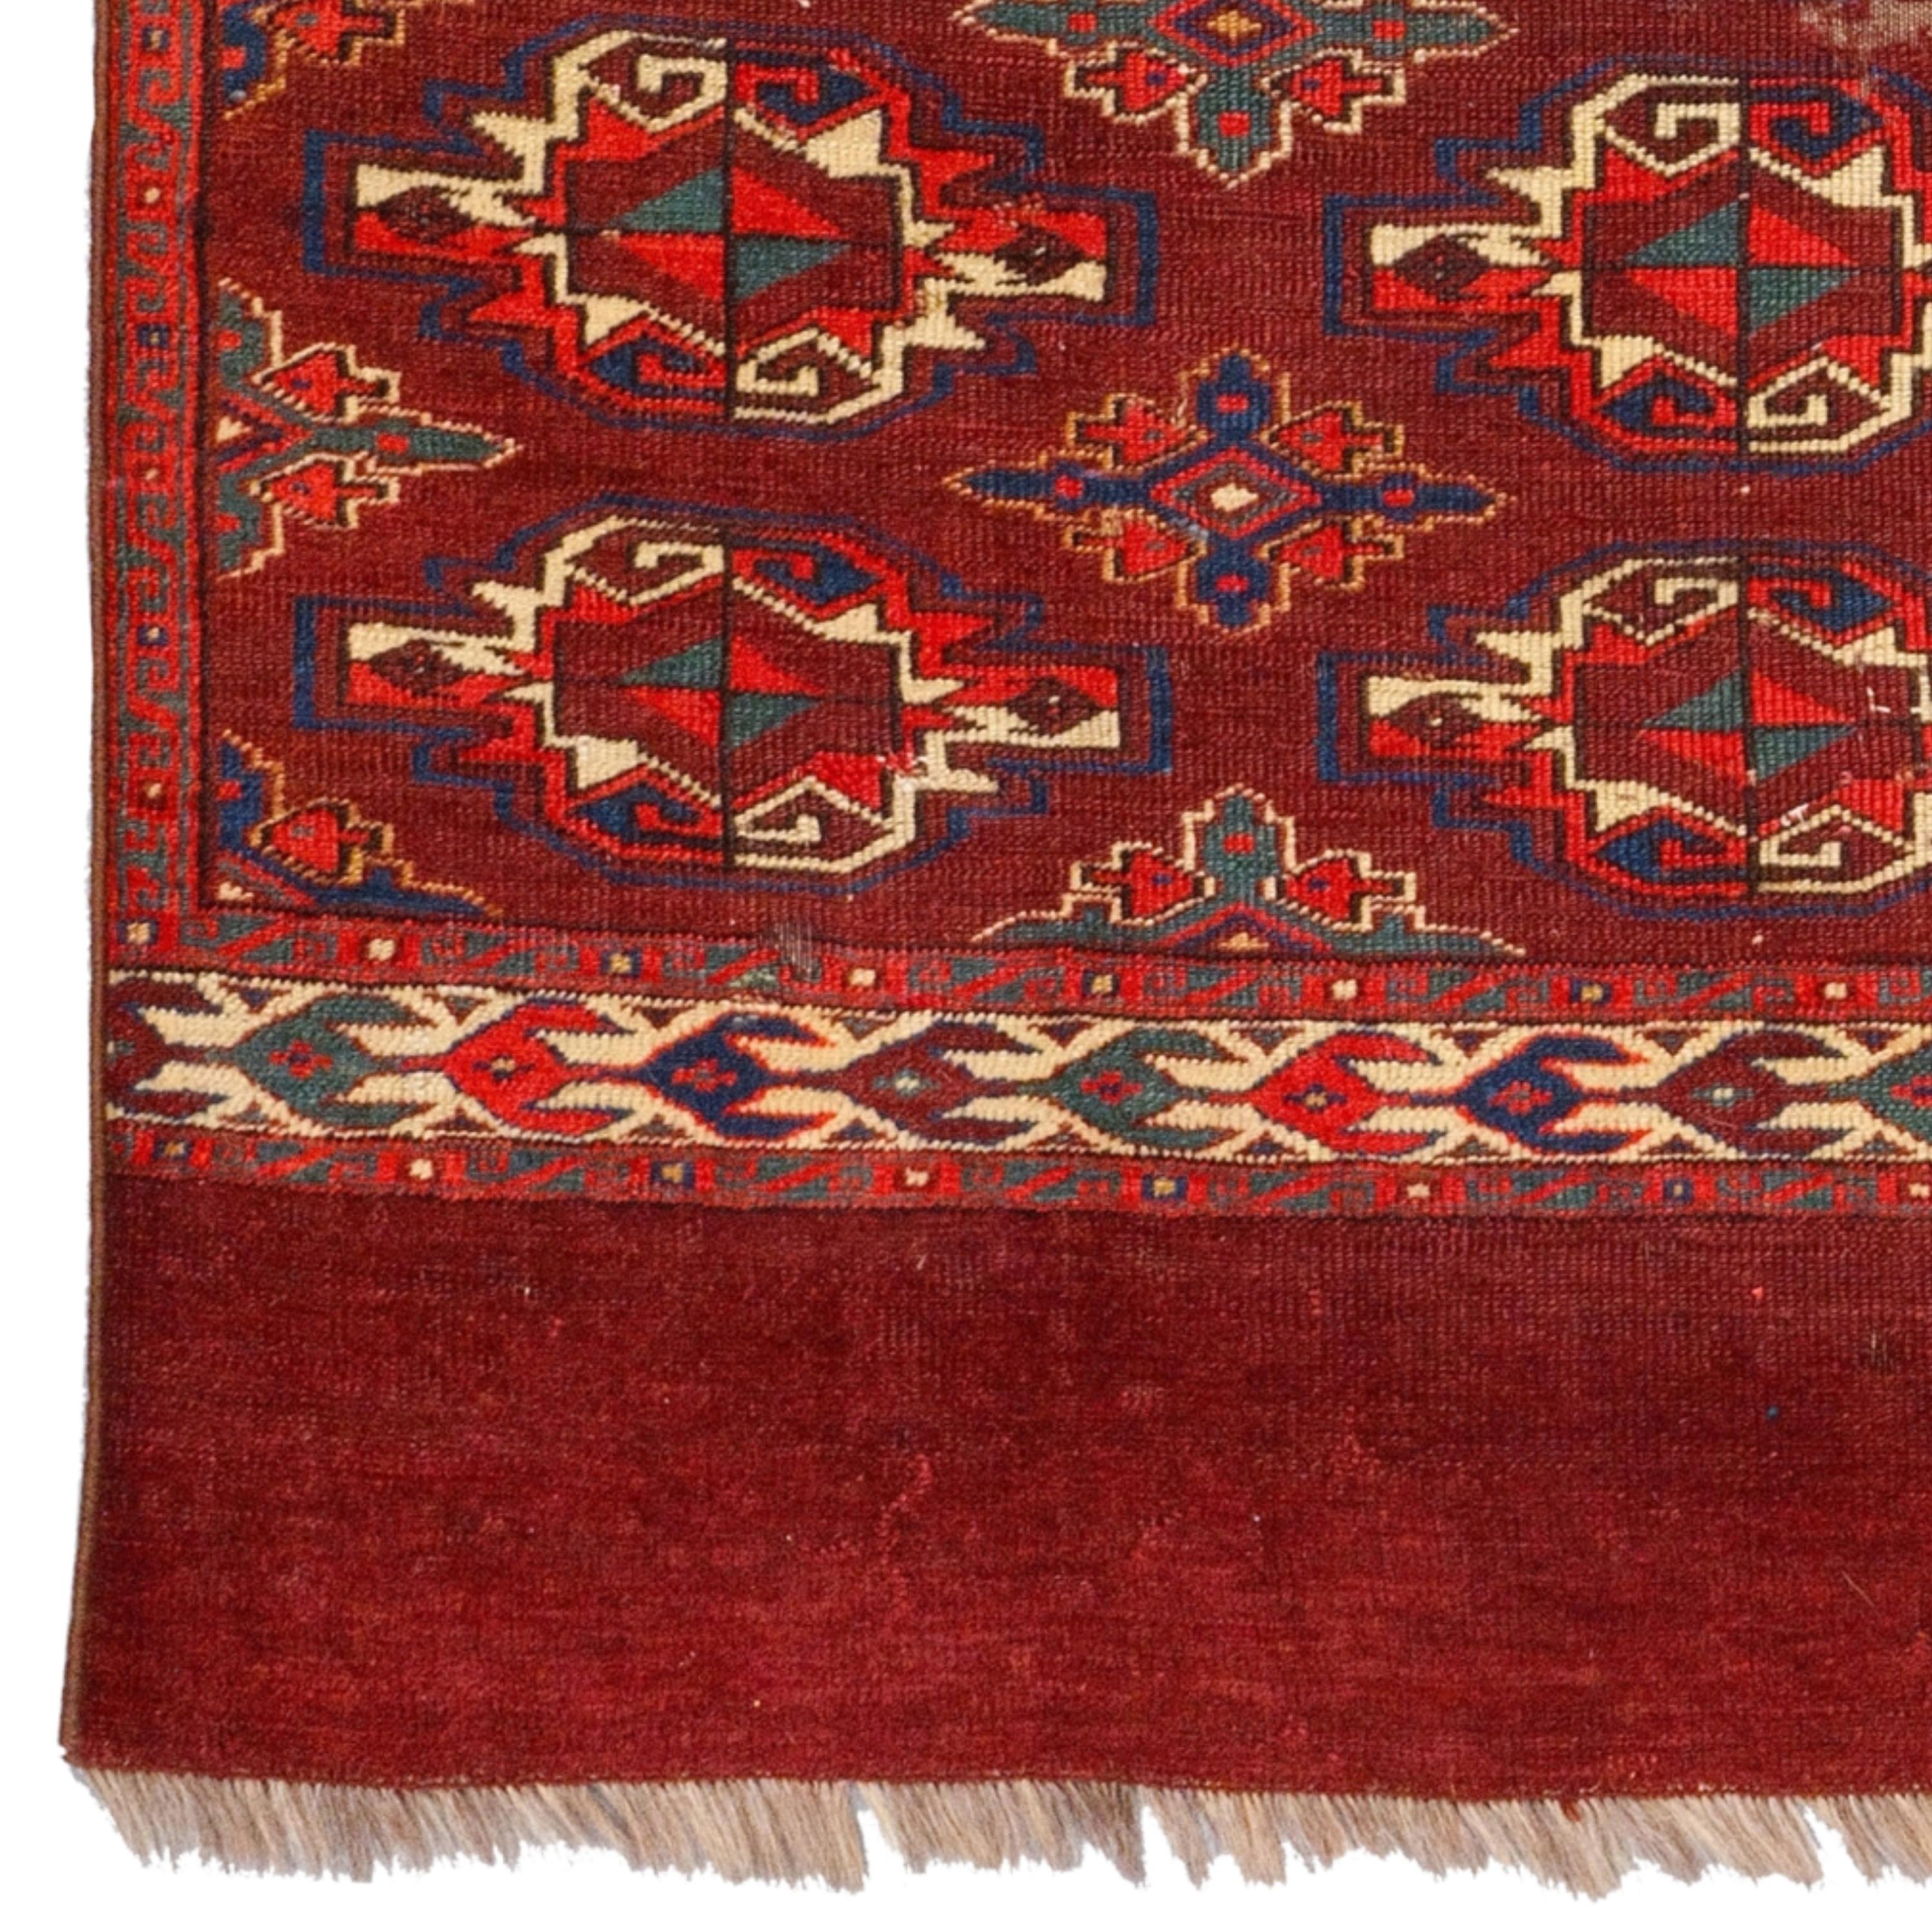 A Unique Piece of the 19th Century: Antique Turkmen Yomud Chuval Carpet

This elegant 19th-century Turkmen Yomud Chuval rug is a work of art that can enchant any space with its carefully woven details and vibrant colors. Traditional motifs